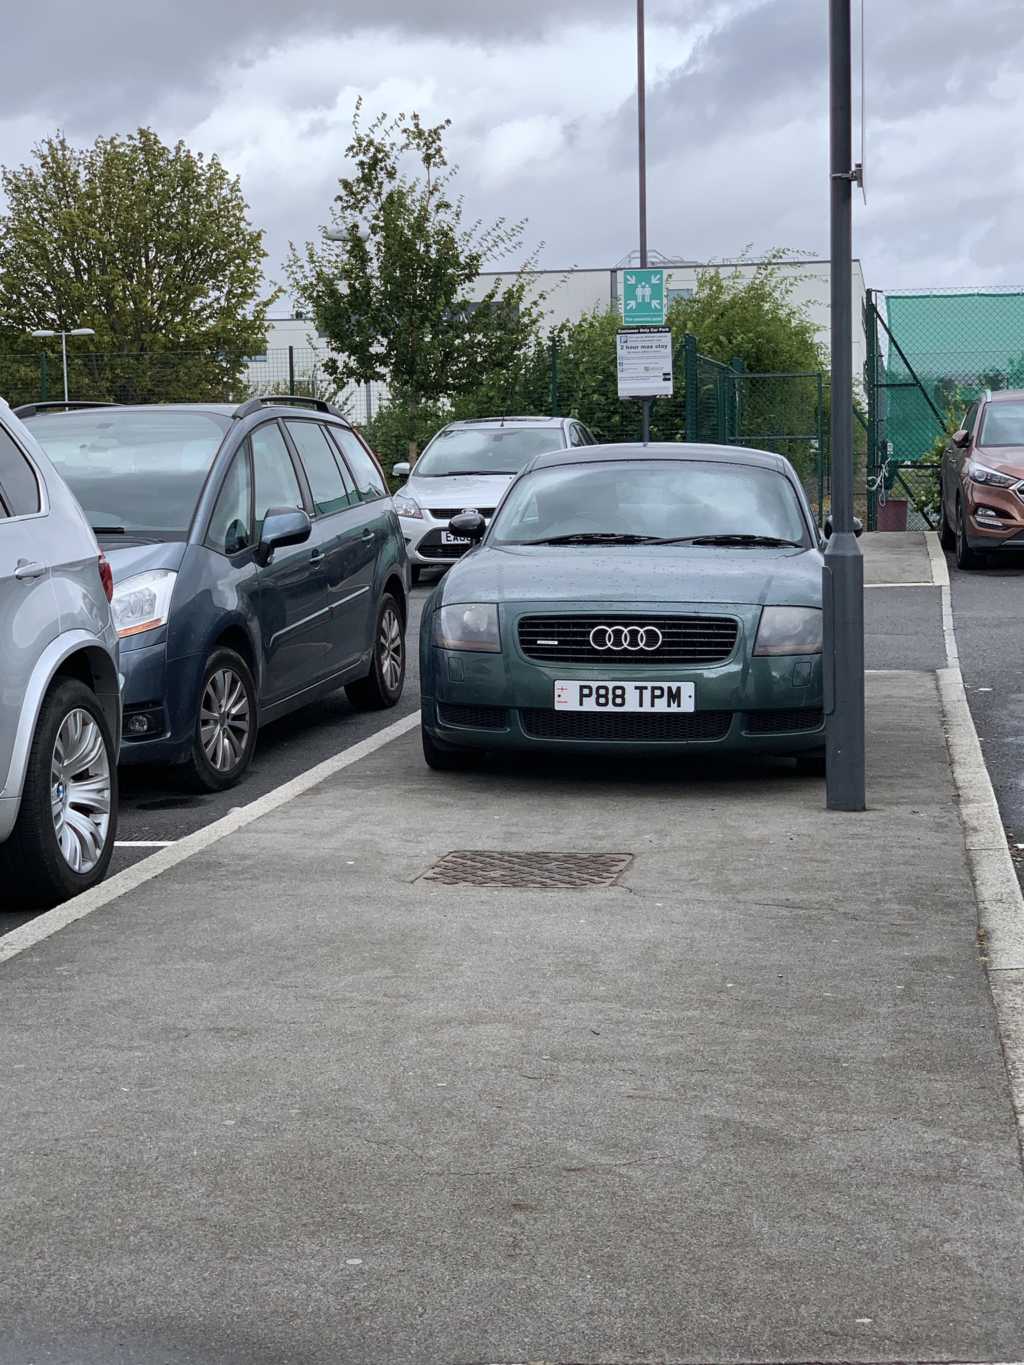 P88 TPM is an Inconsiderate Parker